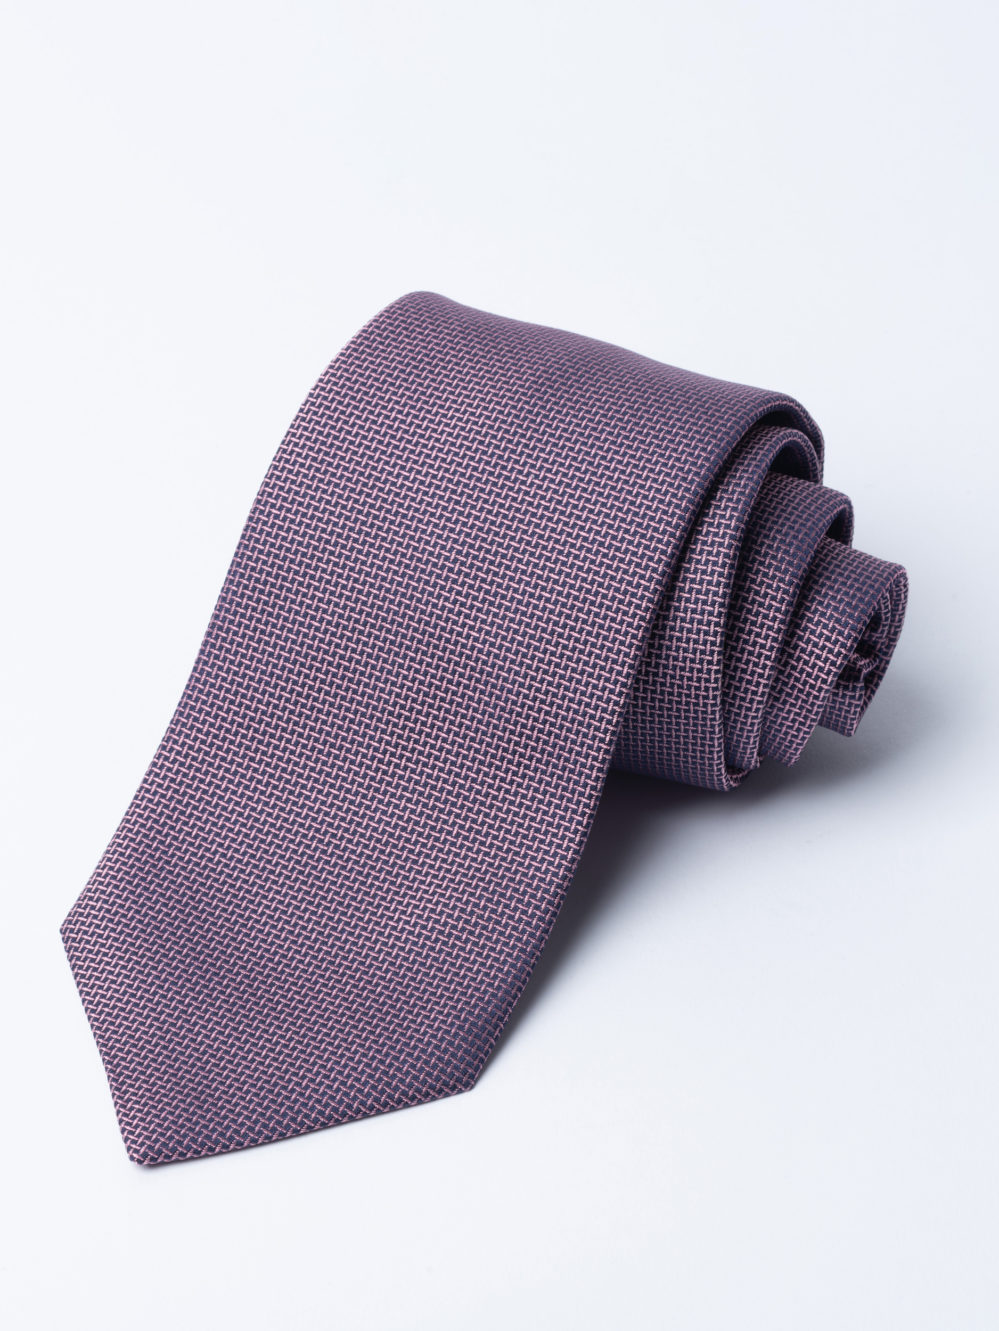 Pink Cundey weave tie - Henry Poole Savile Row